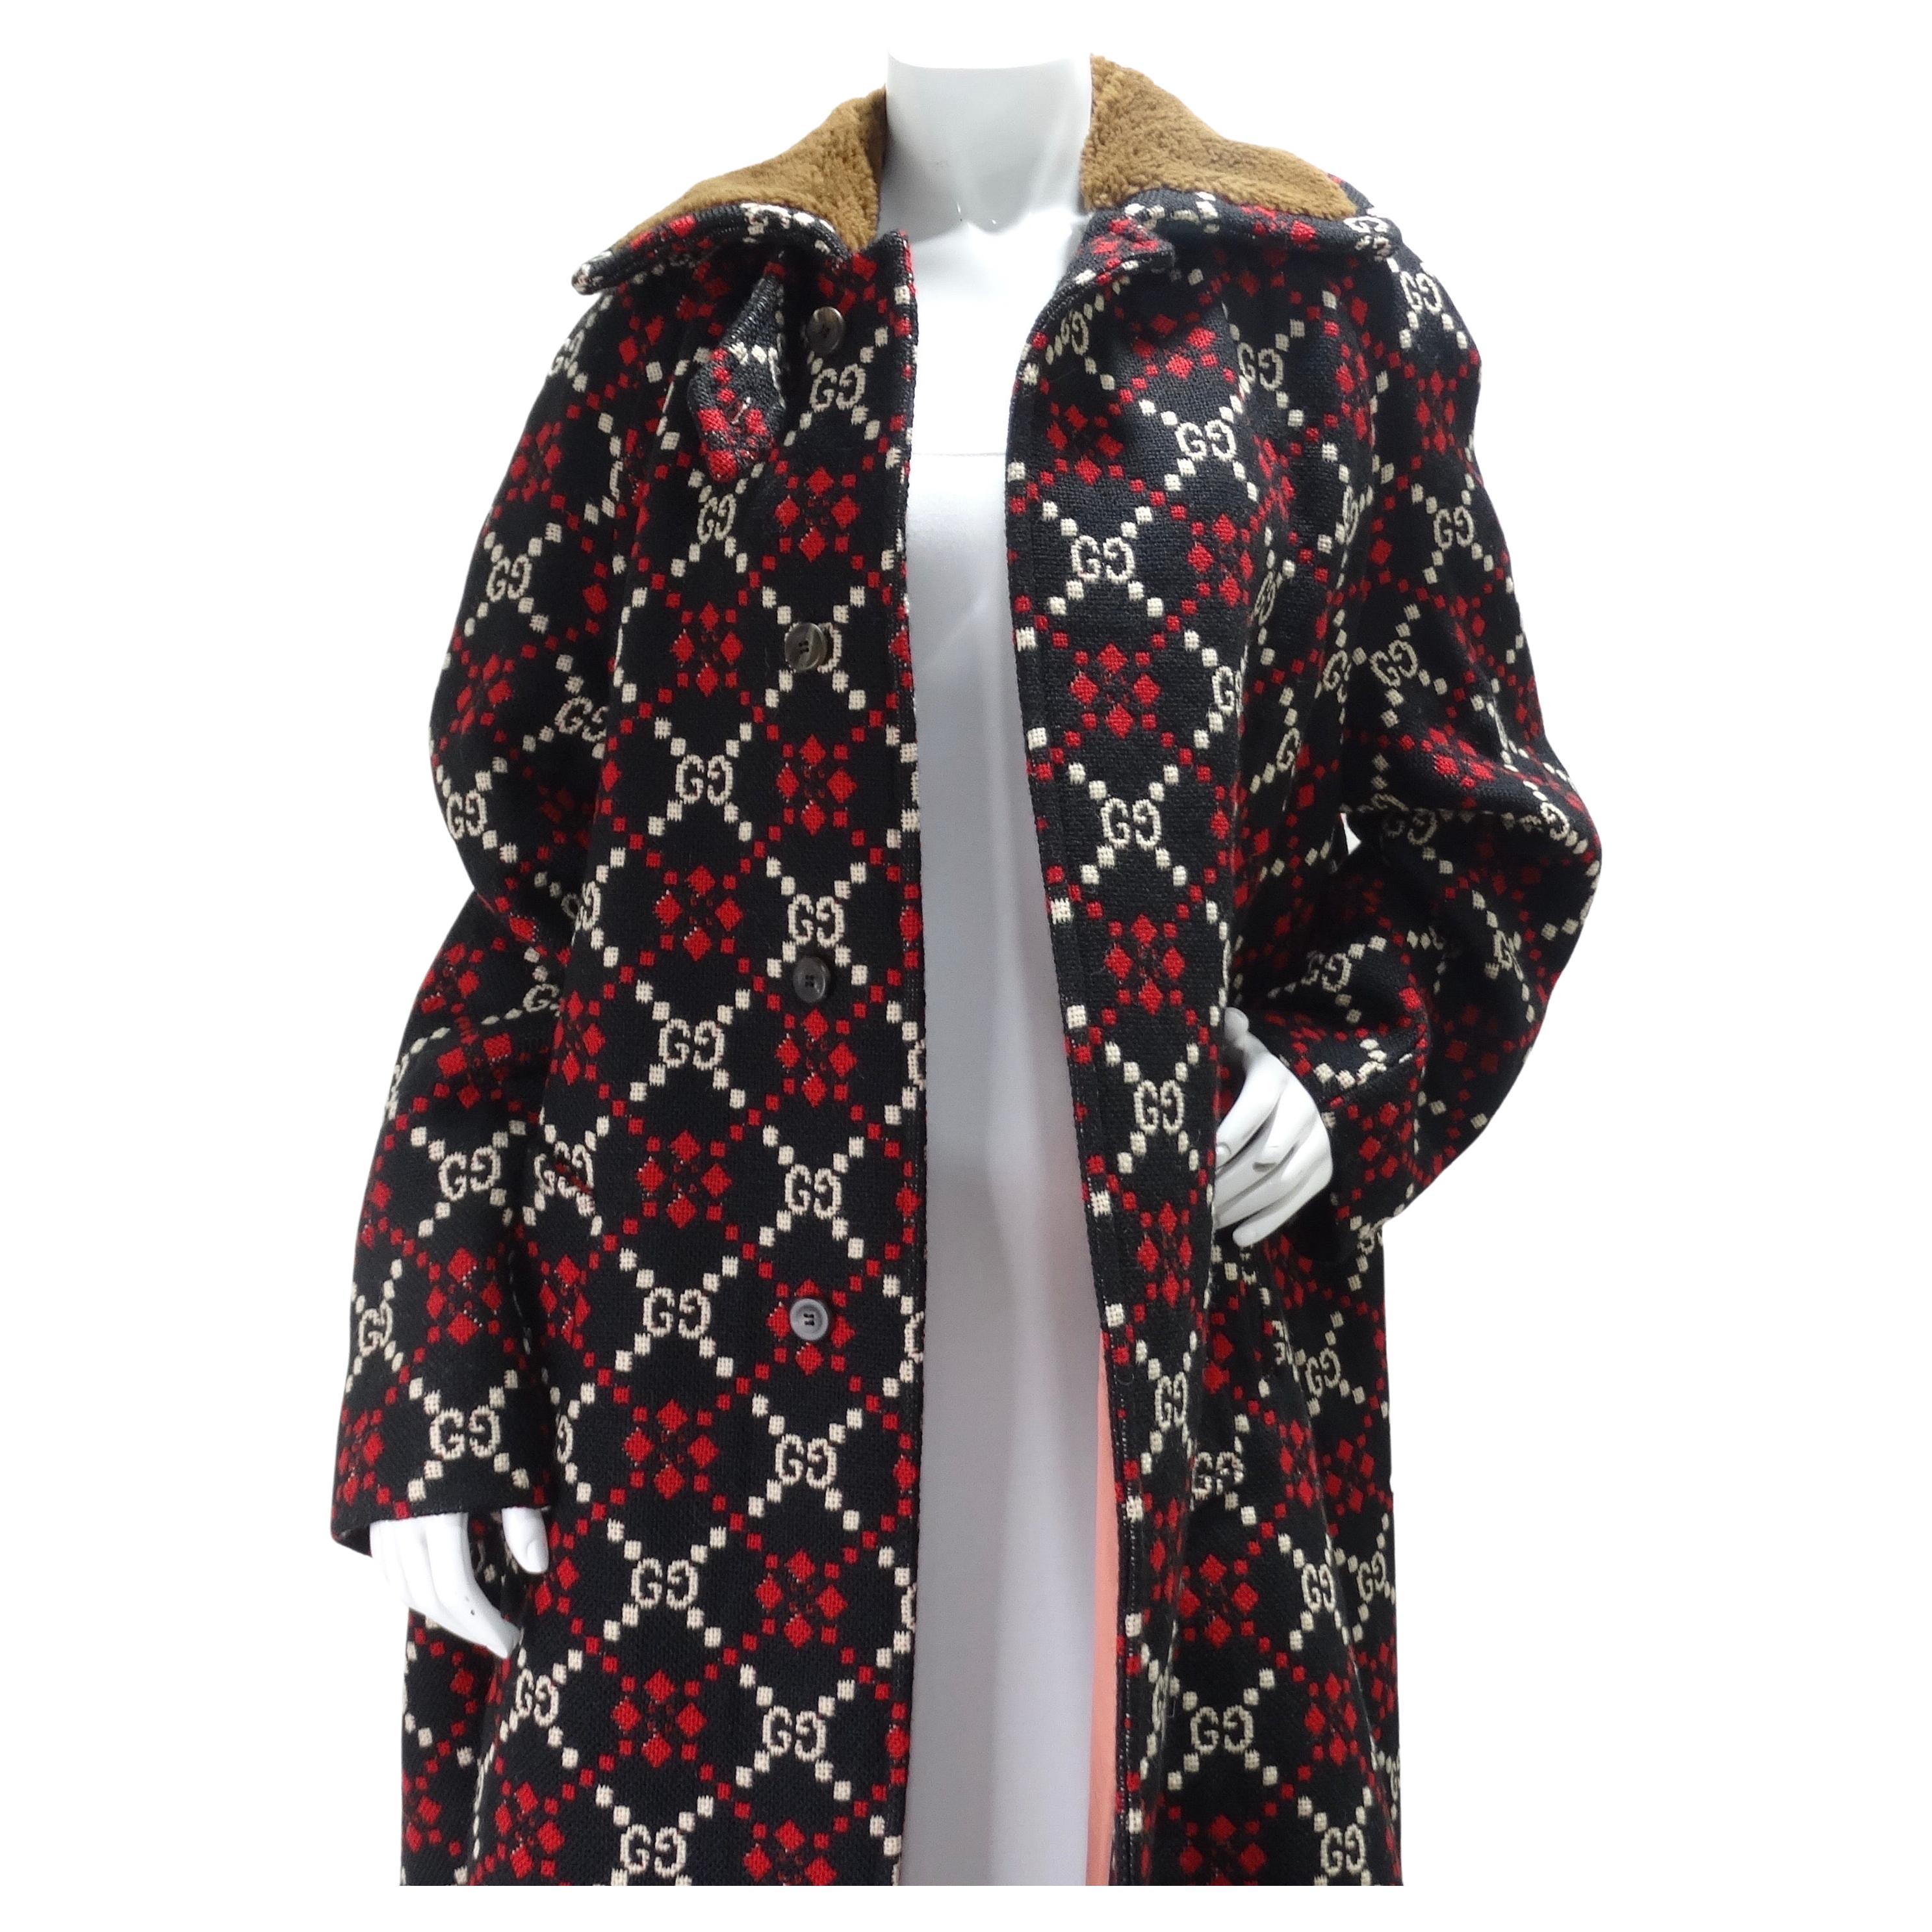 This Gucci monogram coat is going to become your next go-to piece to keep warm! Spectacular 100% wool Gucci coat covered in red and white signature Gucci monogram. Featuring a sherpa collar, concealed buttons that allow for versatility with wear,